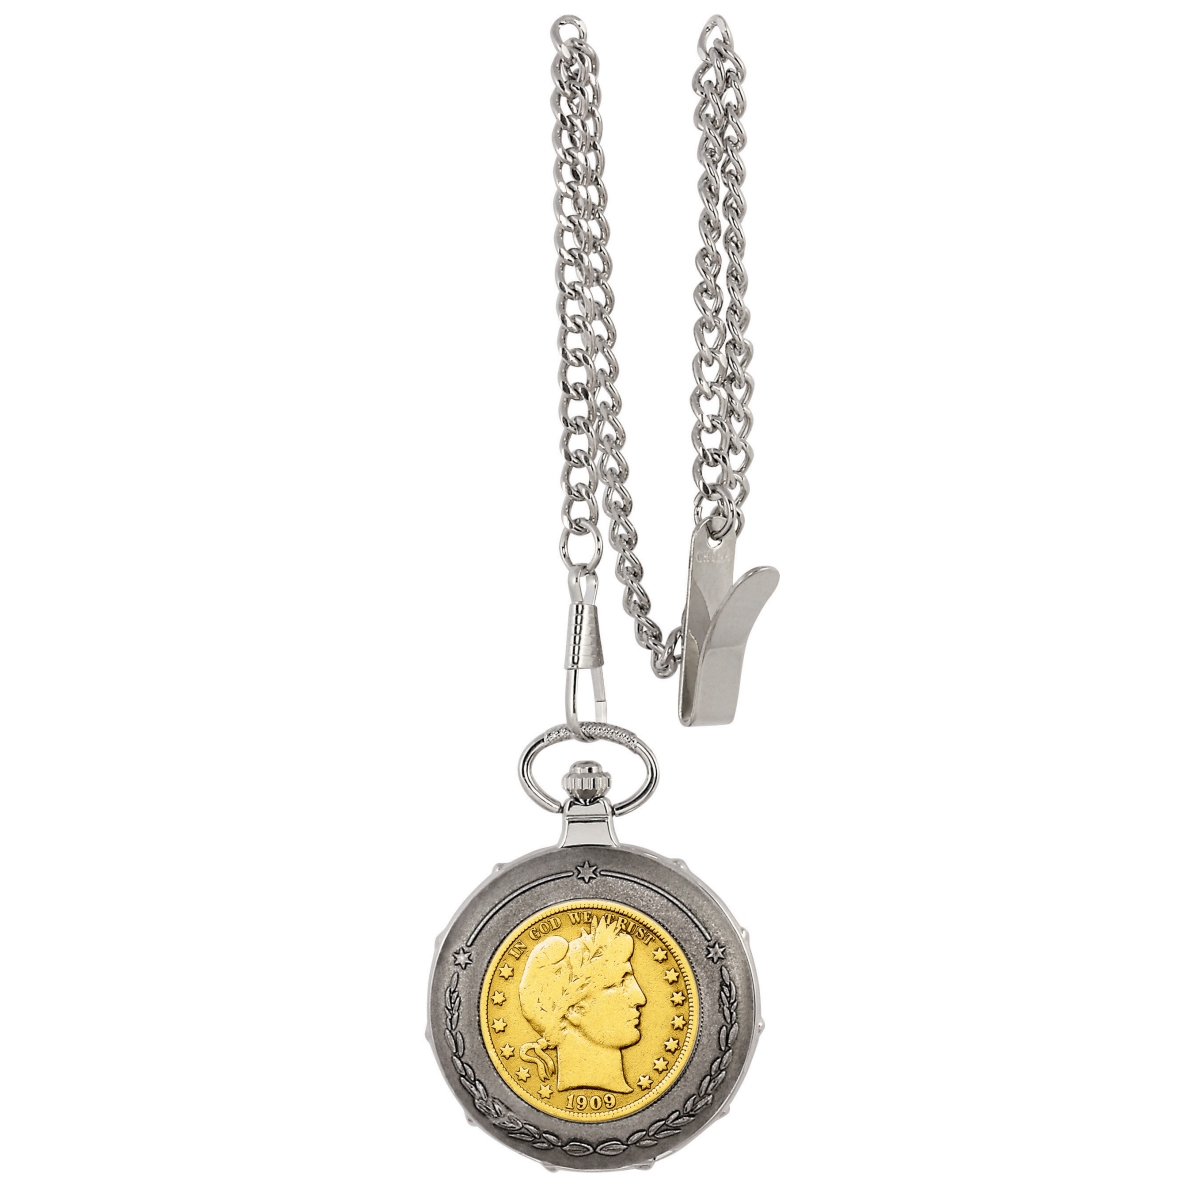 Picture of UPM Global 13217 Gold-Layered Silver Barber Half Dollar Silvertone Train Coin Pocket Watch